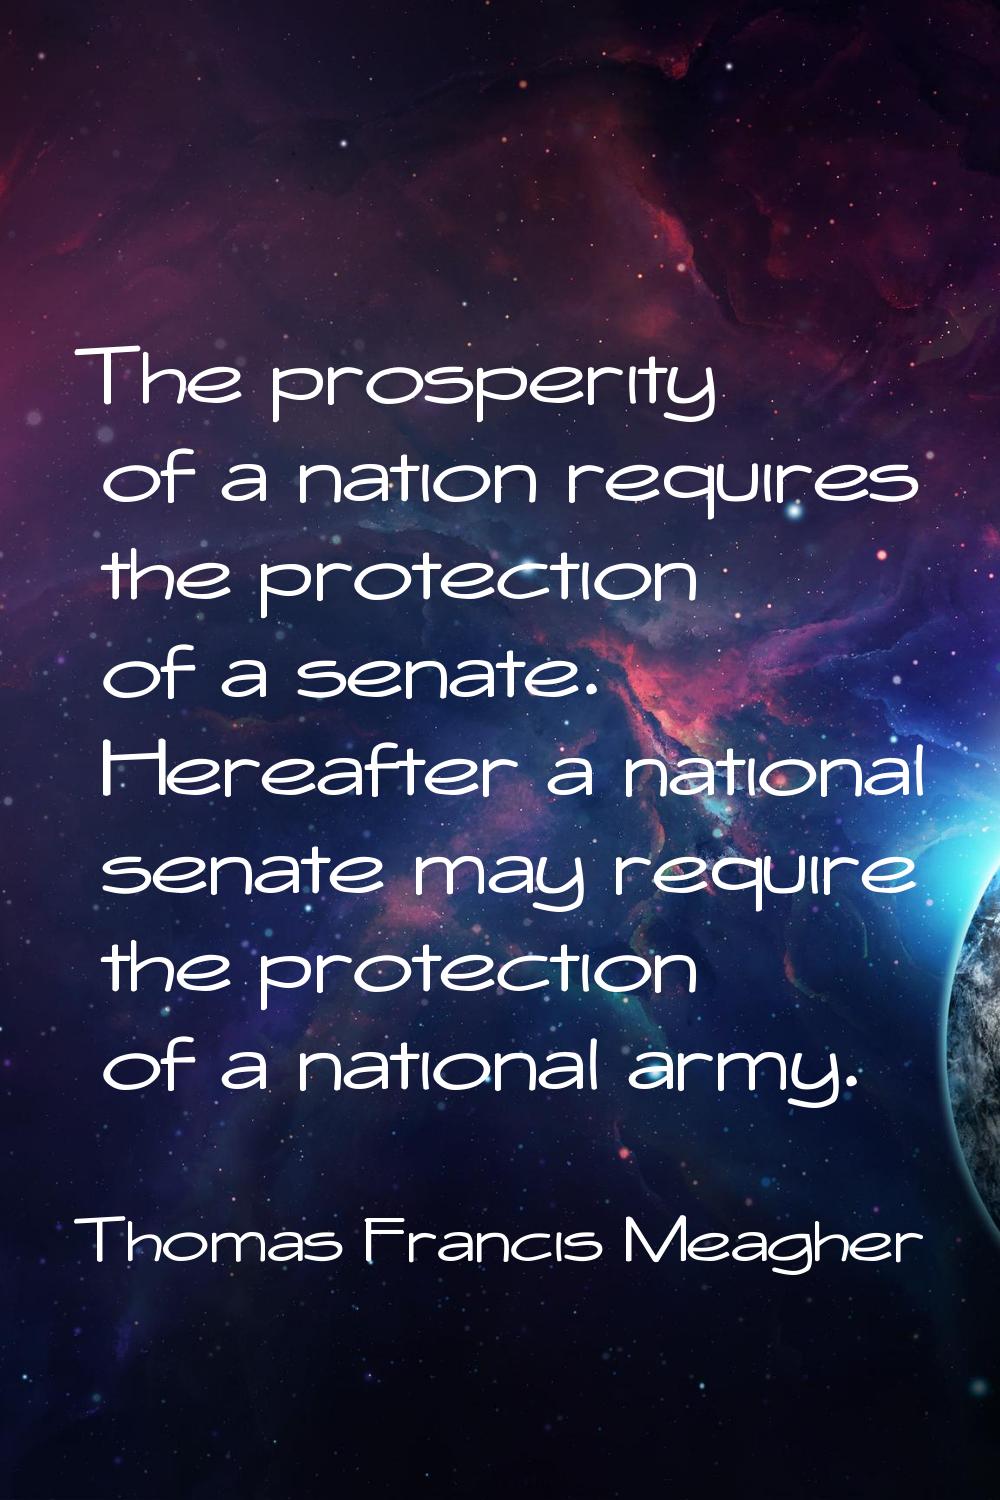 The prosperity of a nation requires the protection of a senate. Hereafter a national senate may req